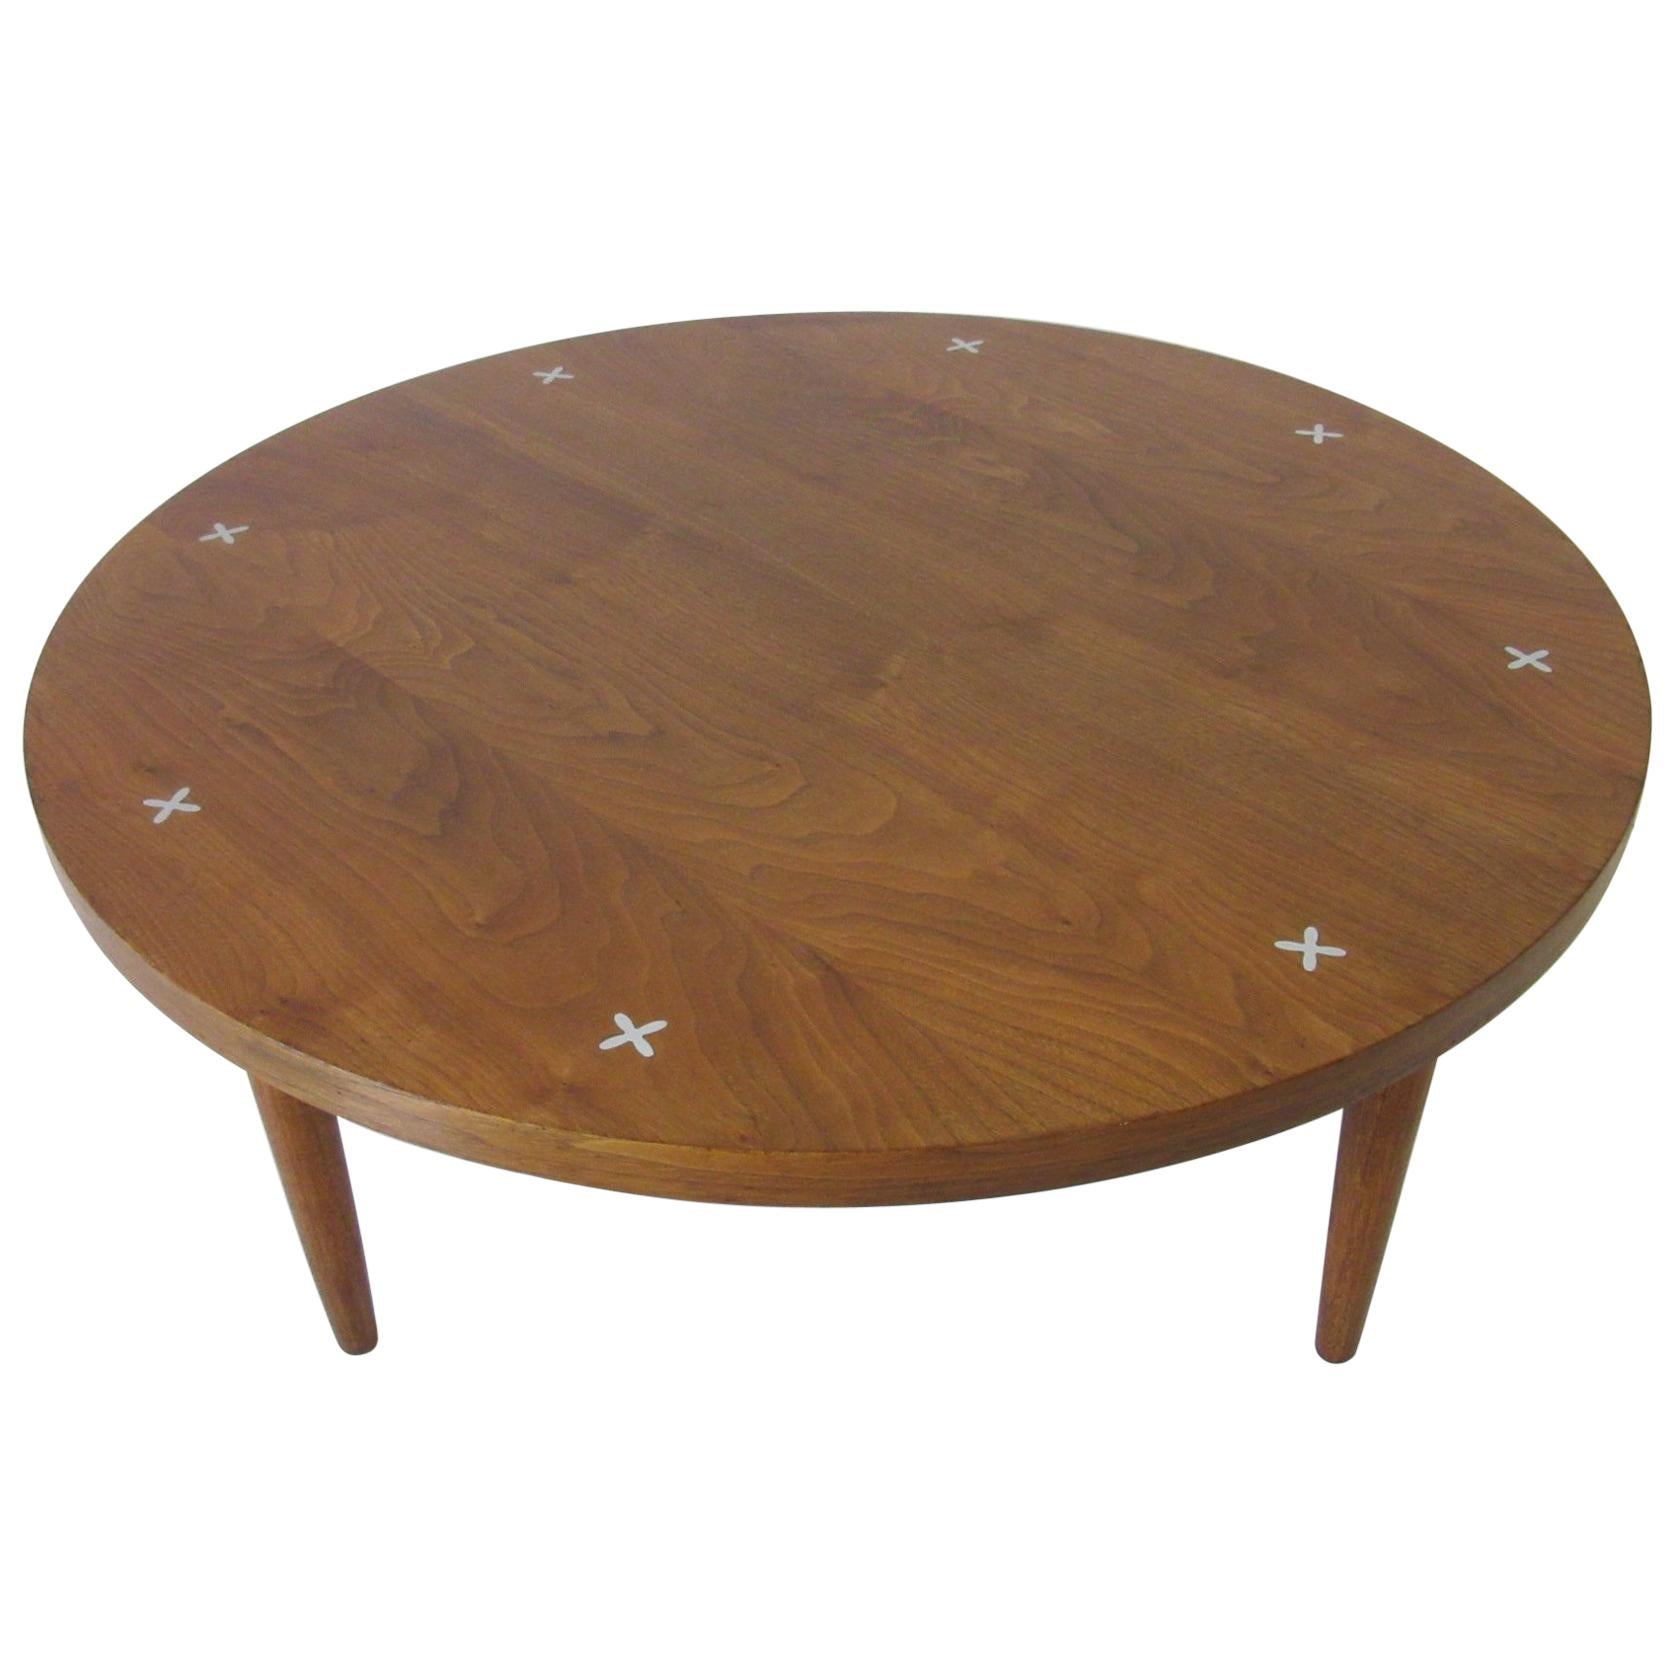 Walnut Coffee Table by Merton Gershun for American of Martinsville